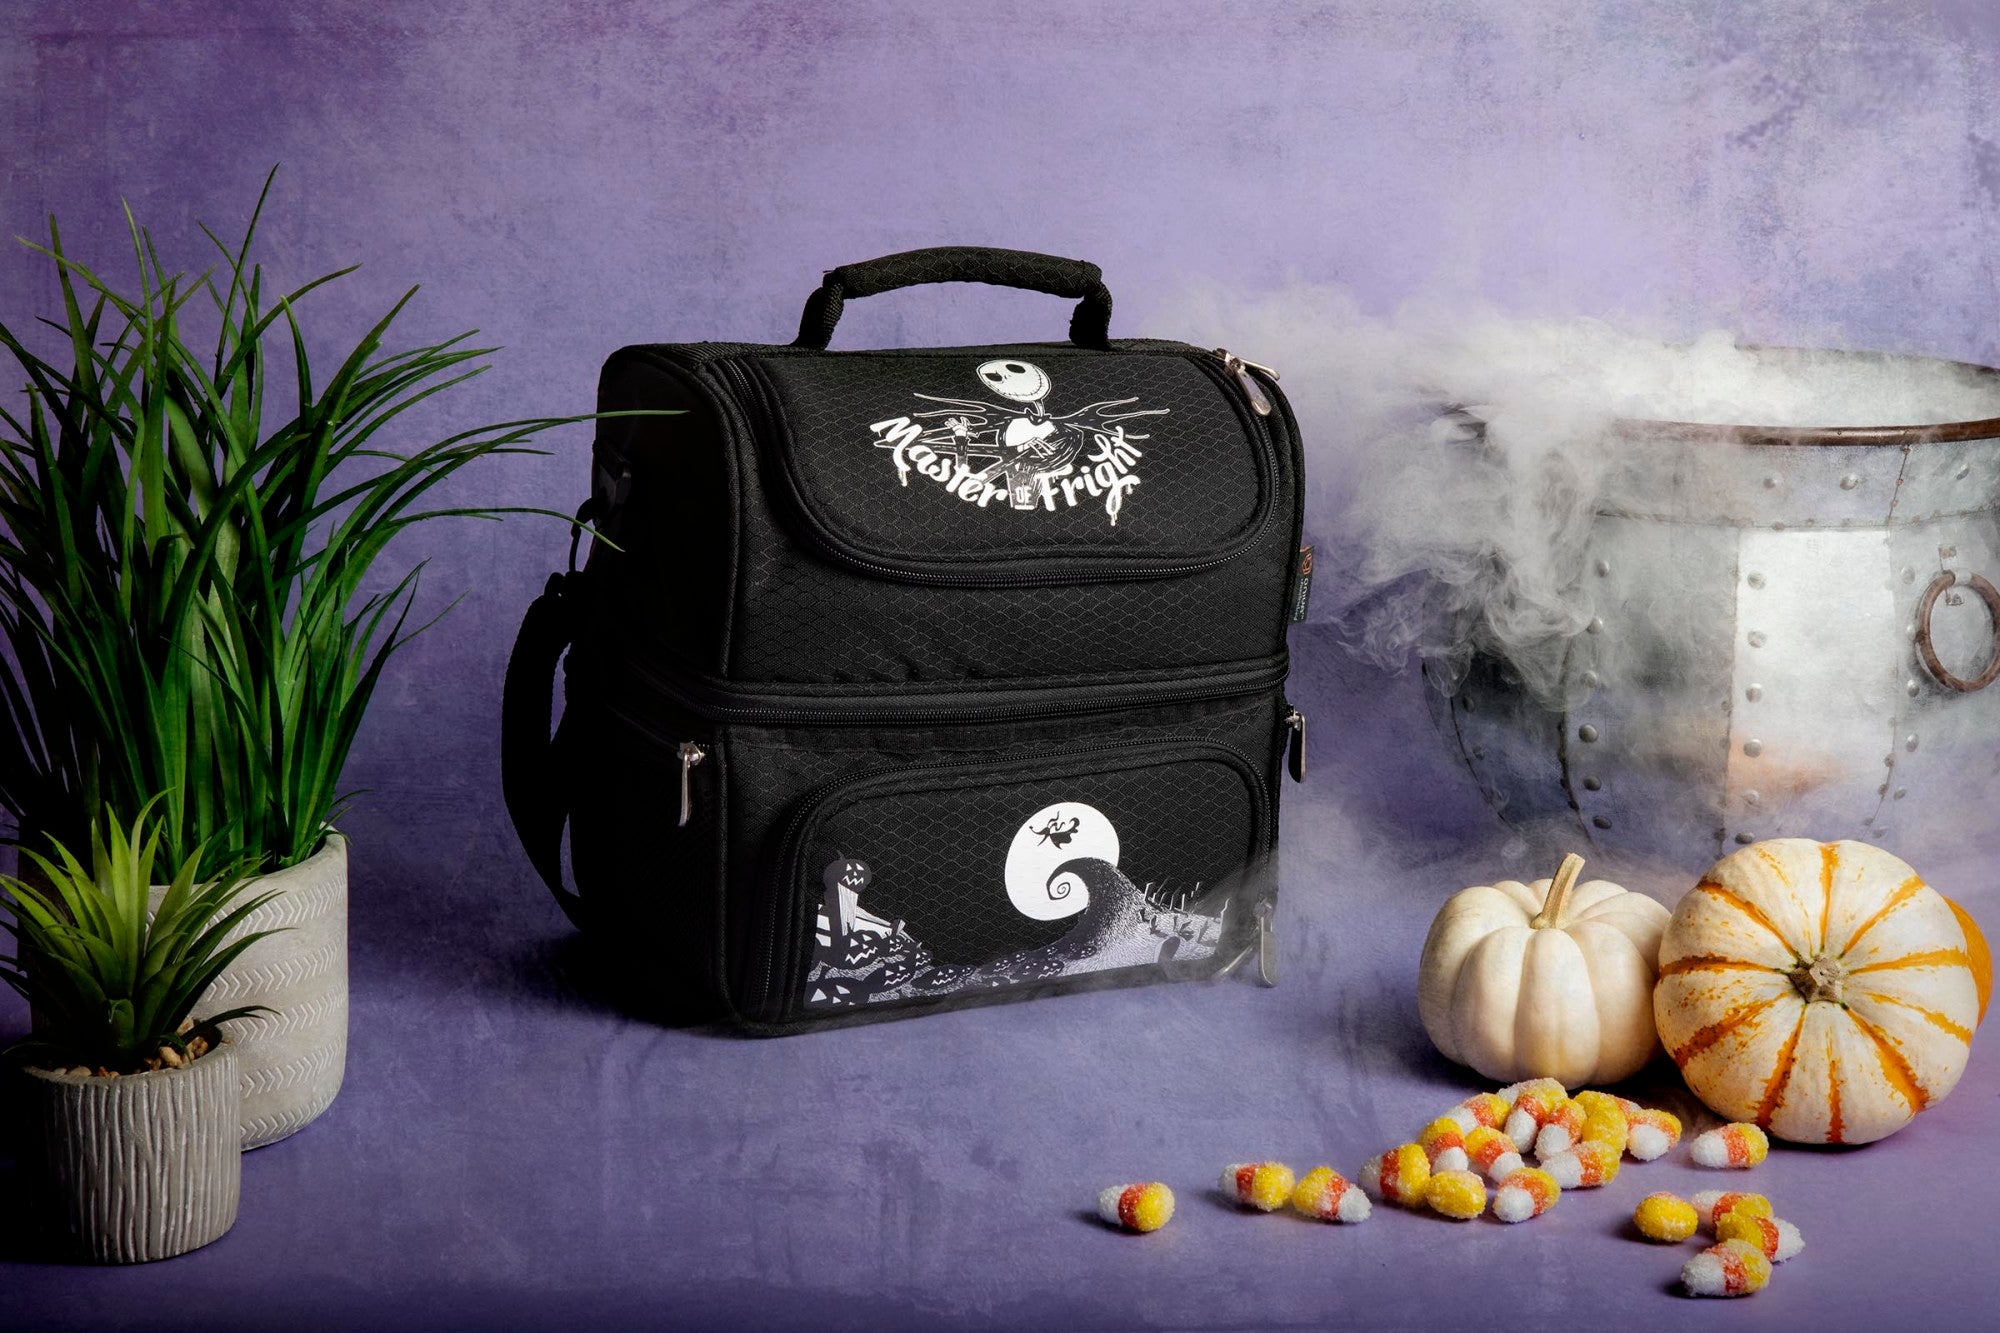 Nightmare Before Christmas - Pranzo Lunch Bag Cooler with Utensils